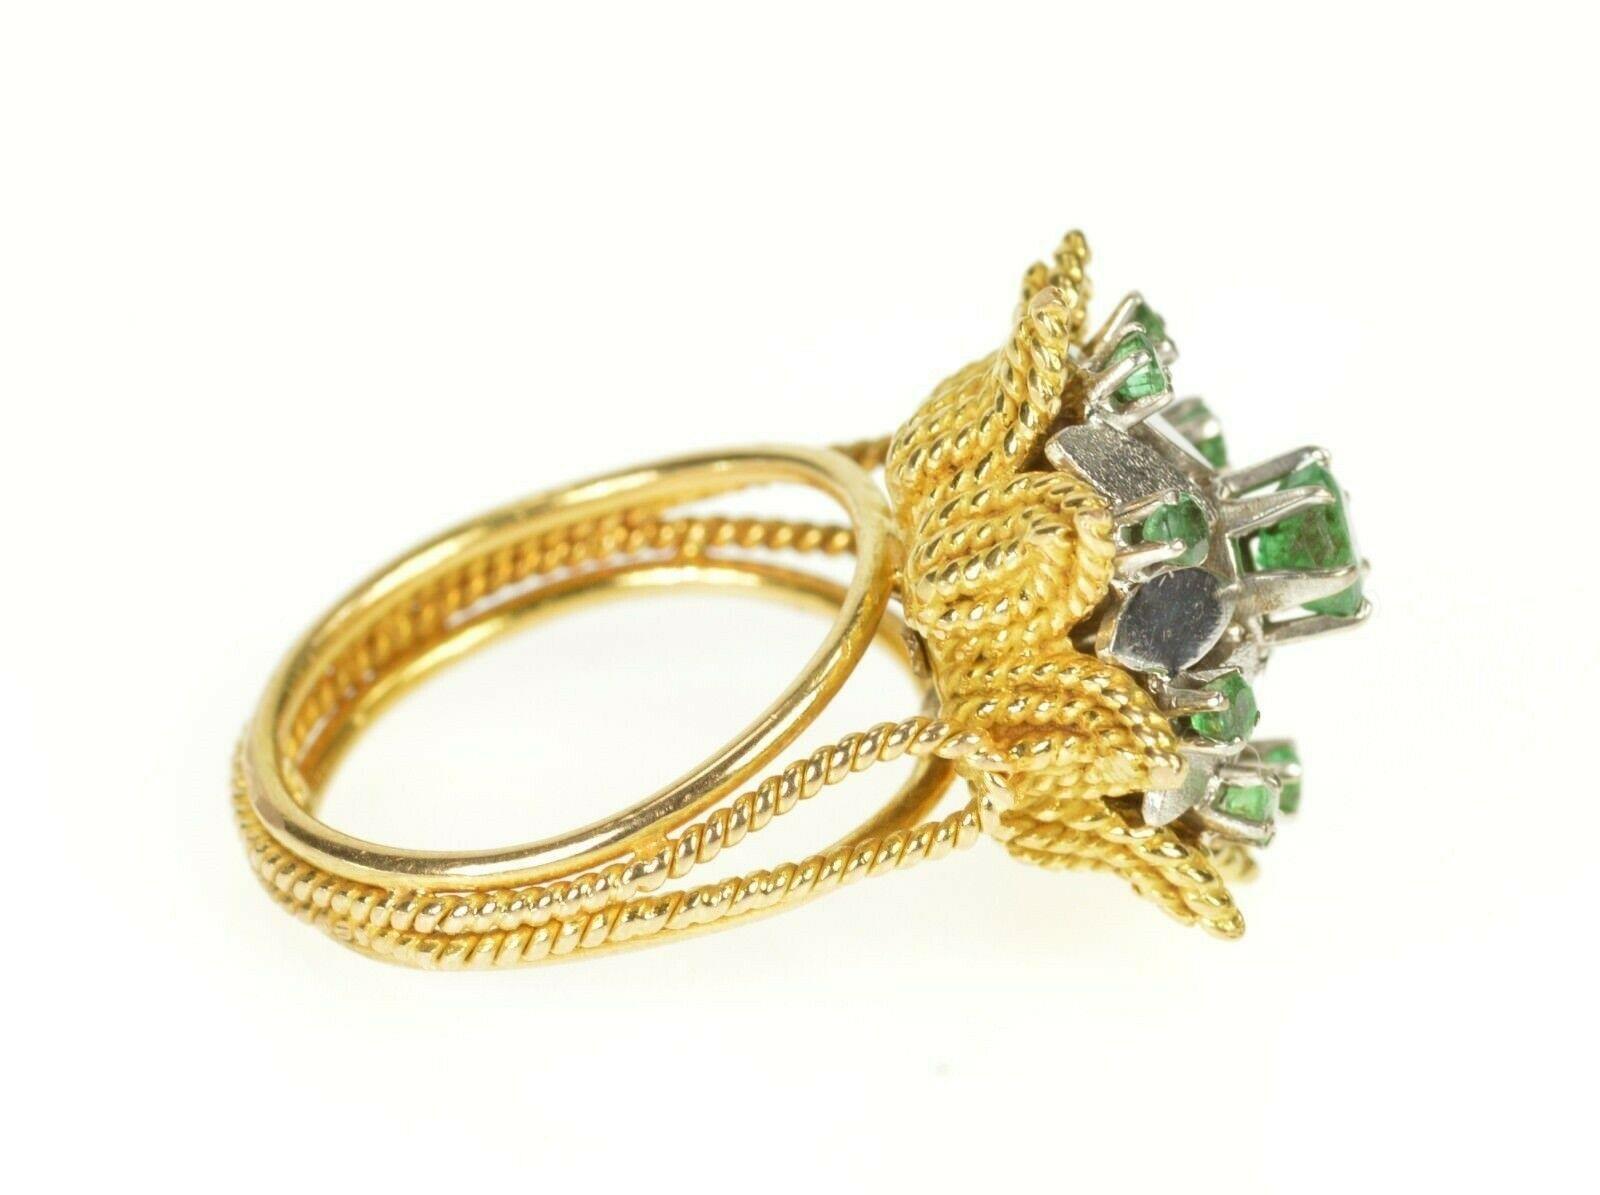 Item:  18K Retro Two Tone Emerald Floral Rope Cocktail Ring Size 6.25 Yellow Gold

Weight:  9.3g

Gem Stone:  8x=Emerald

Center Gem Stone:  1x=Emerald

Composition:  18k Gold Tested

Condition:  Estate:Good